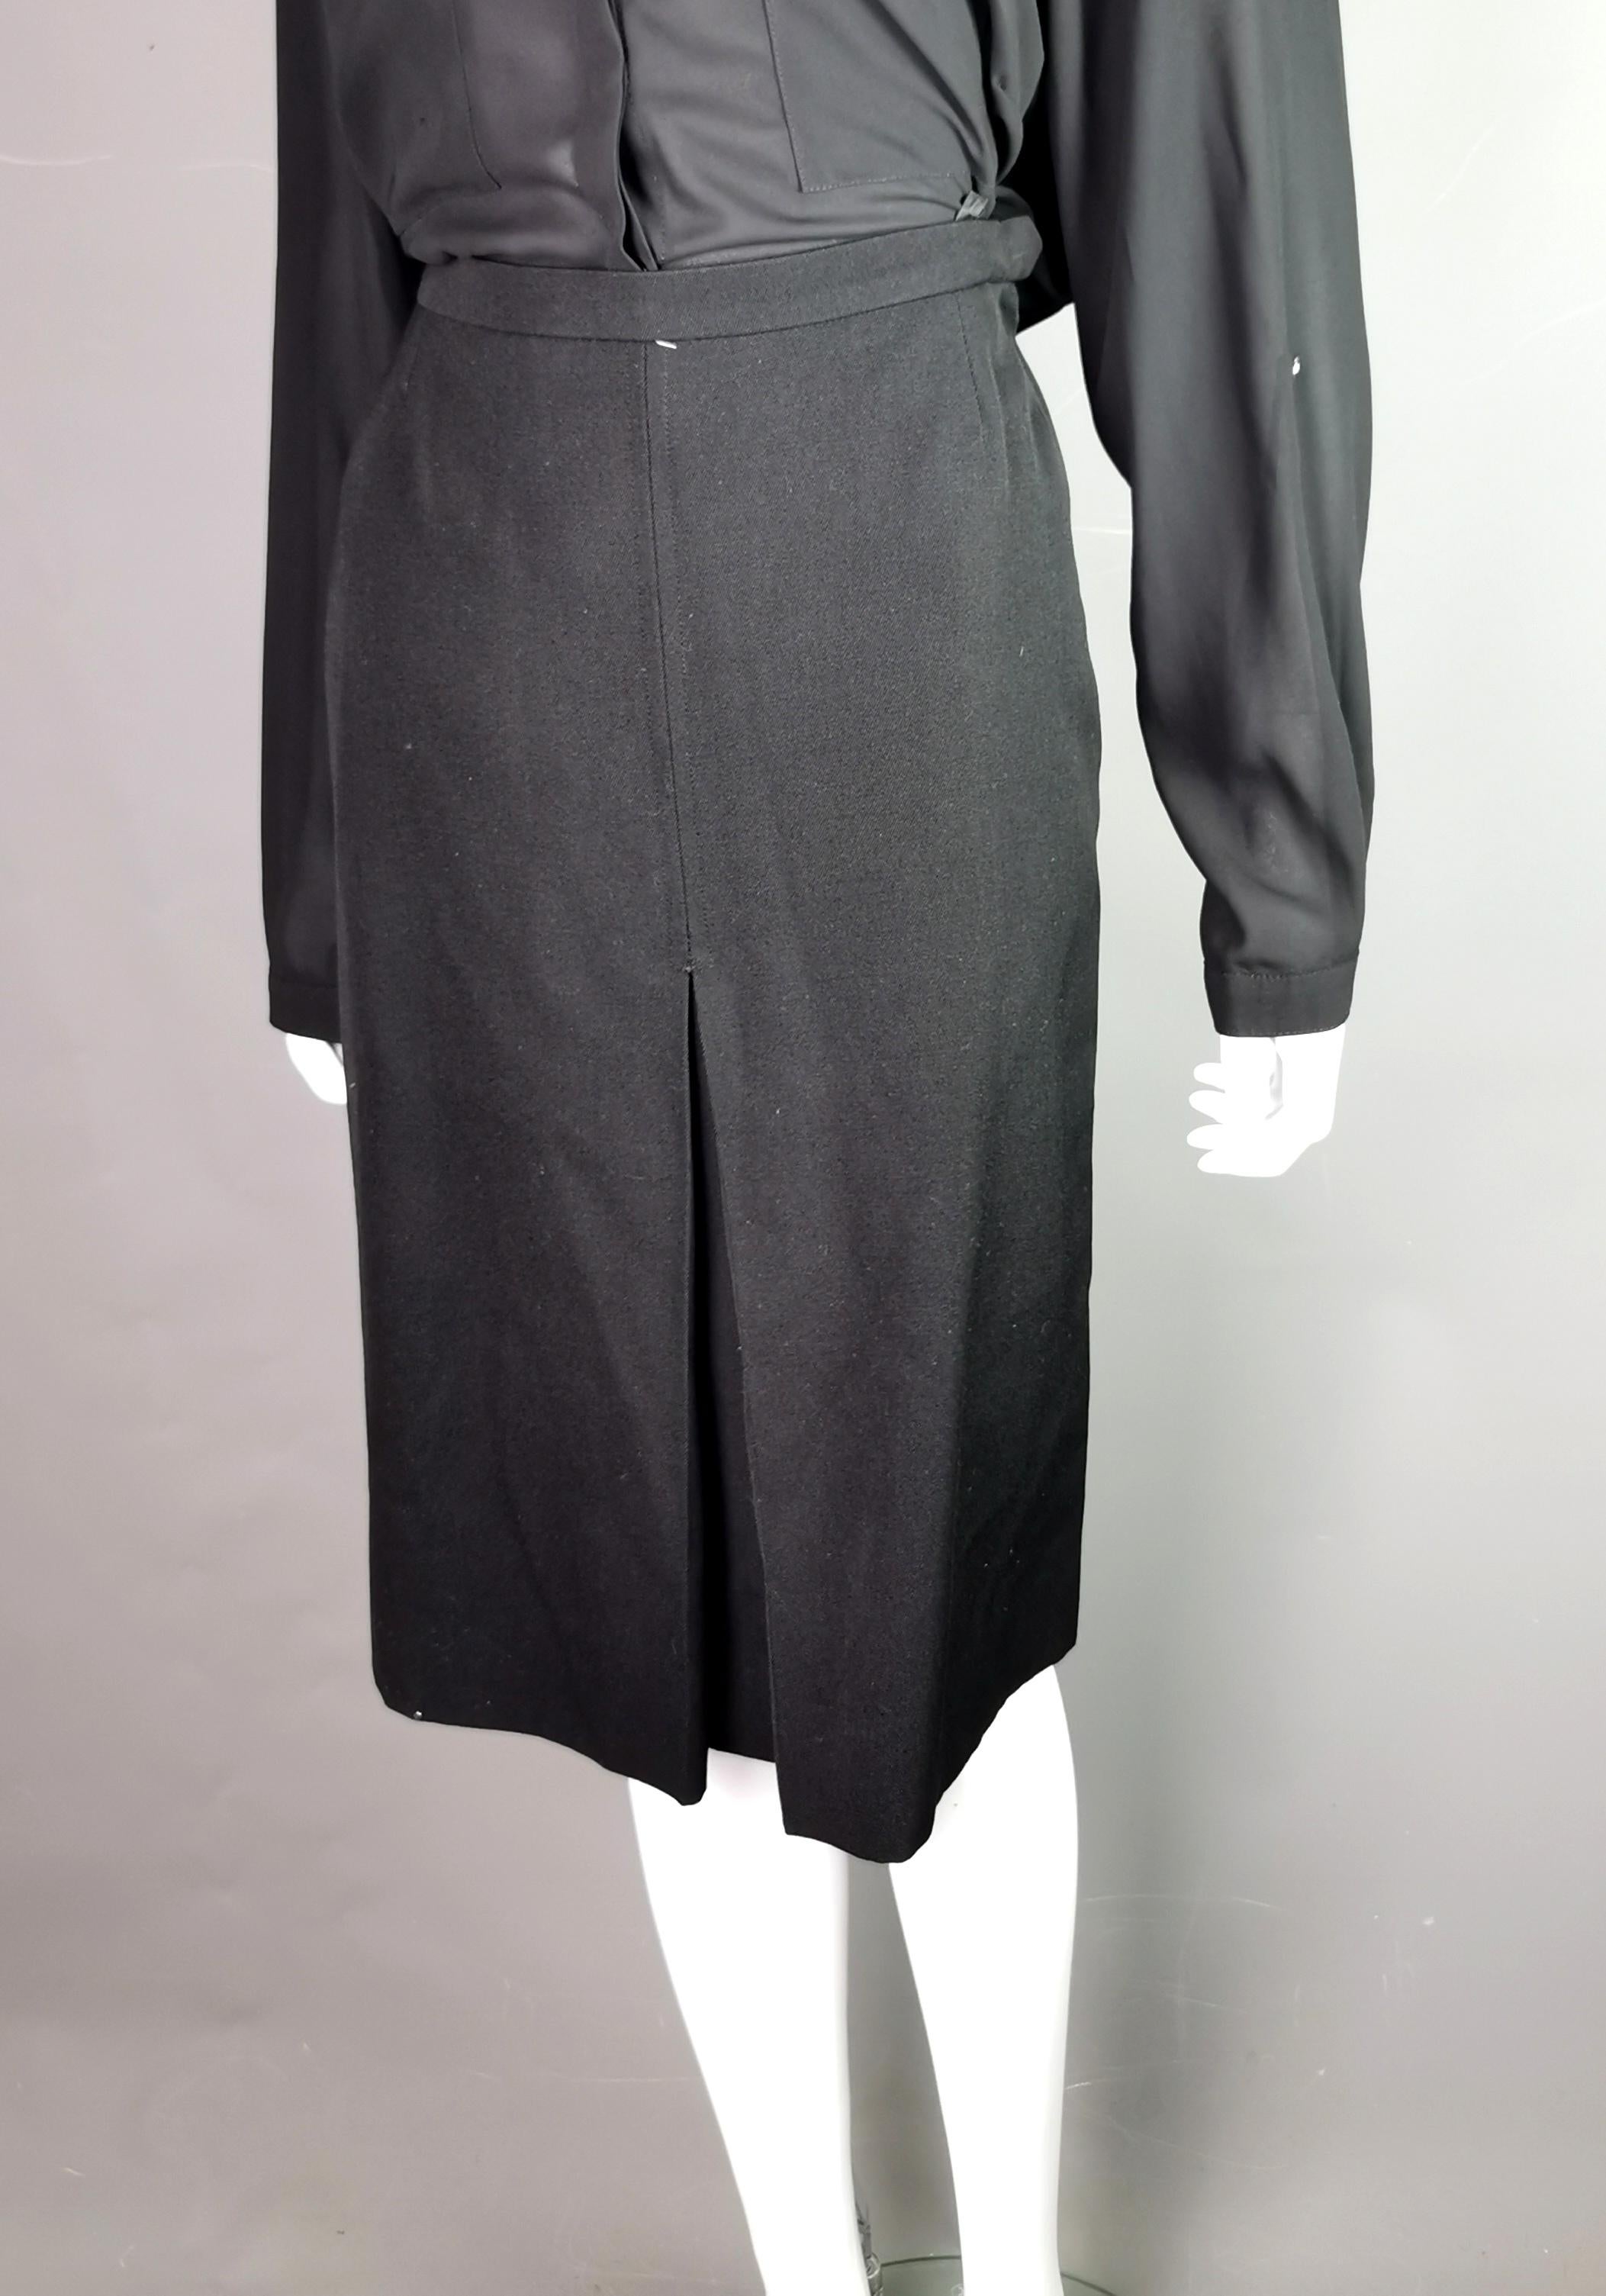 A stylish vintage YSL Rive Gauche black wool pleat front skirt.

It is a pencil style skirt with a pleat design to the front.

It fastens at the side with a metal hook fastening and a zip.

Perfect for the office or formal events.

Labelled for YSL